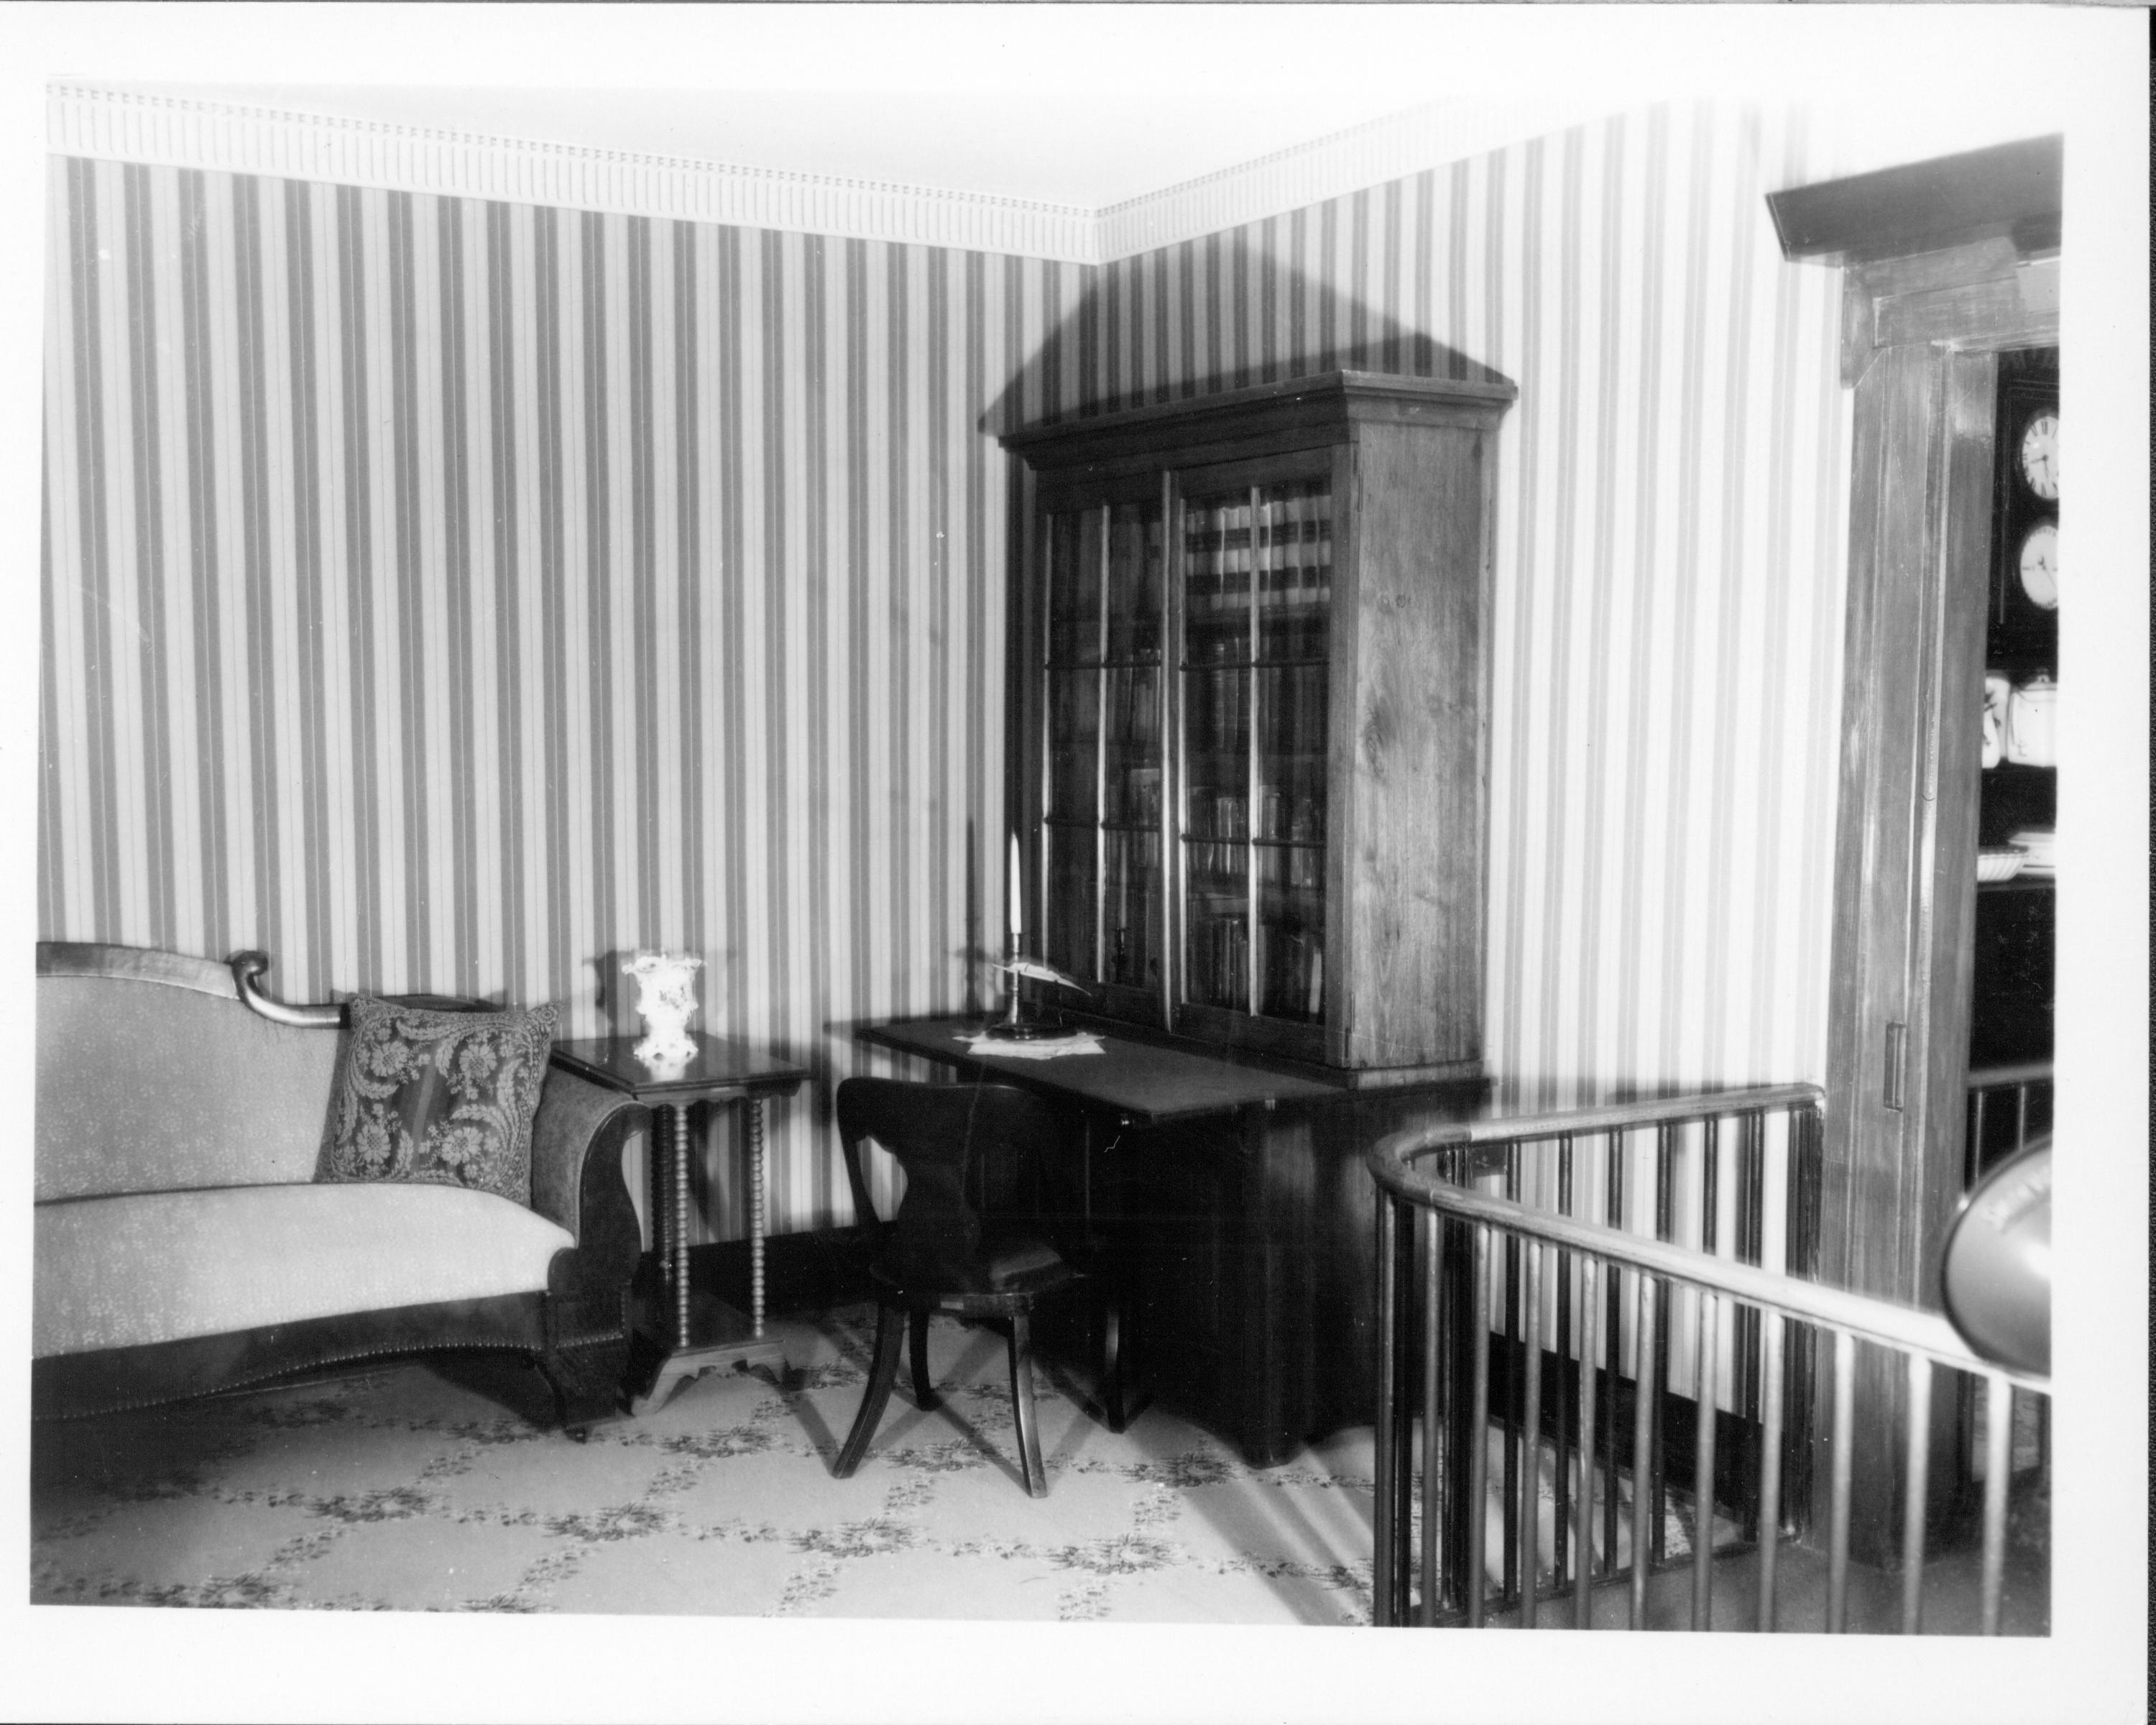 Rear Parlor - Lincoln Home neg.#62, class.#310 Lincoln, Home, Sitting, Room, Parlor